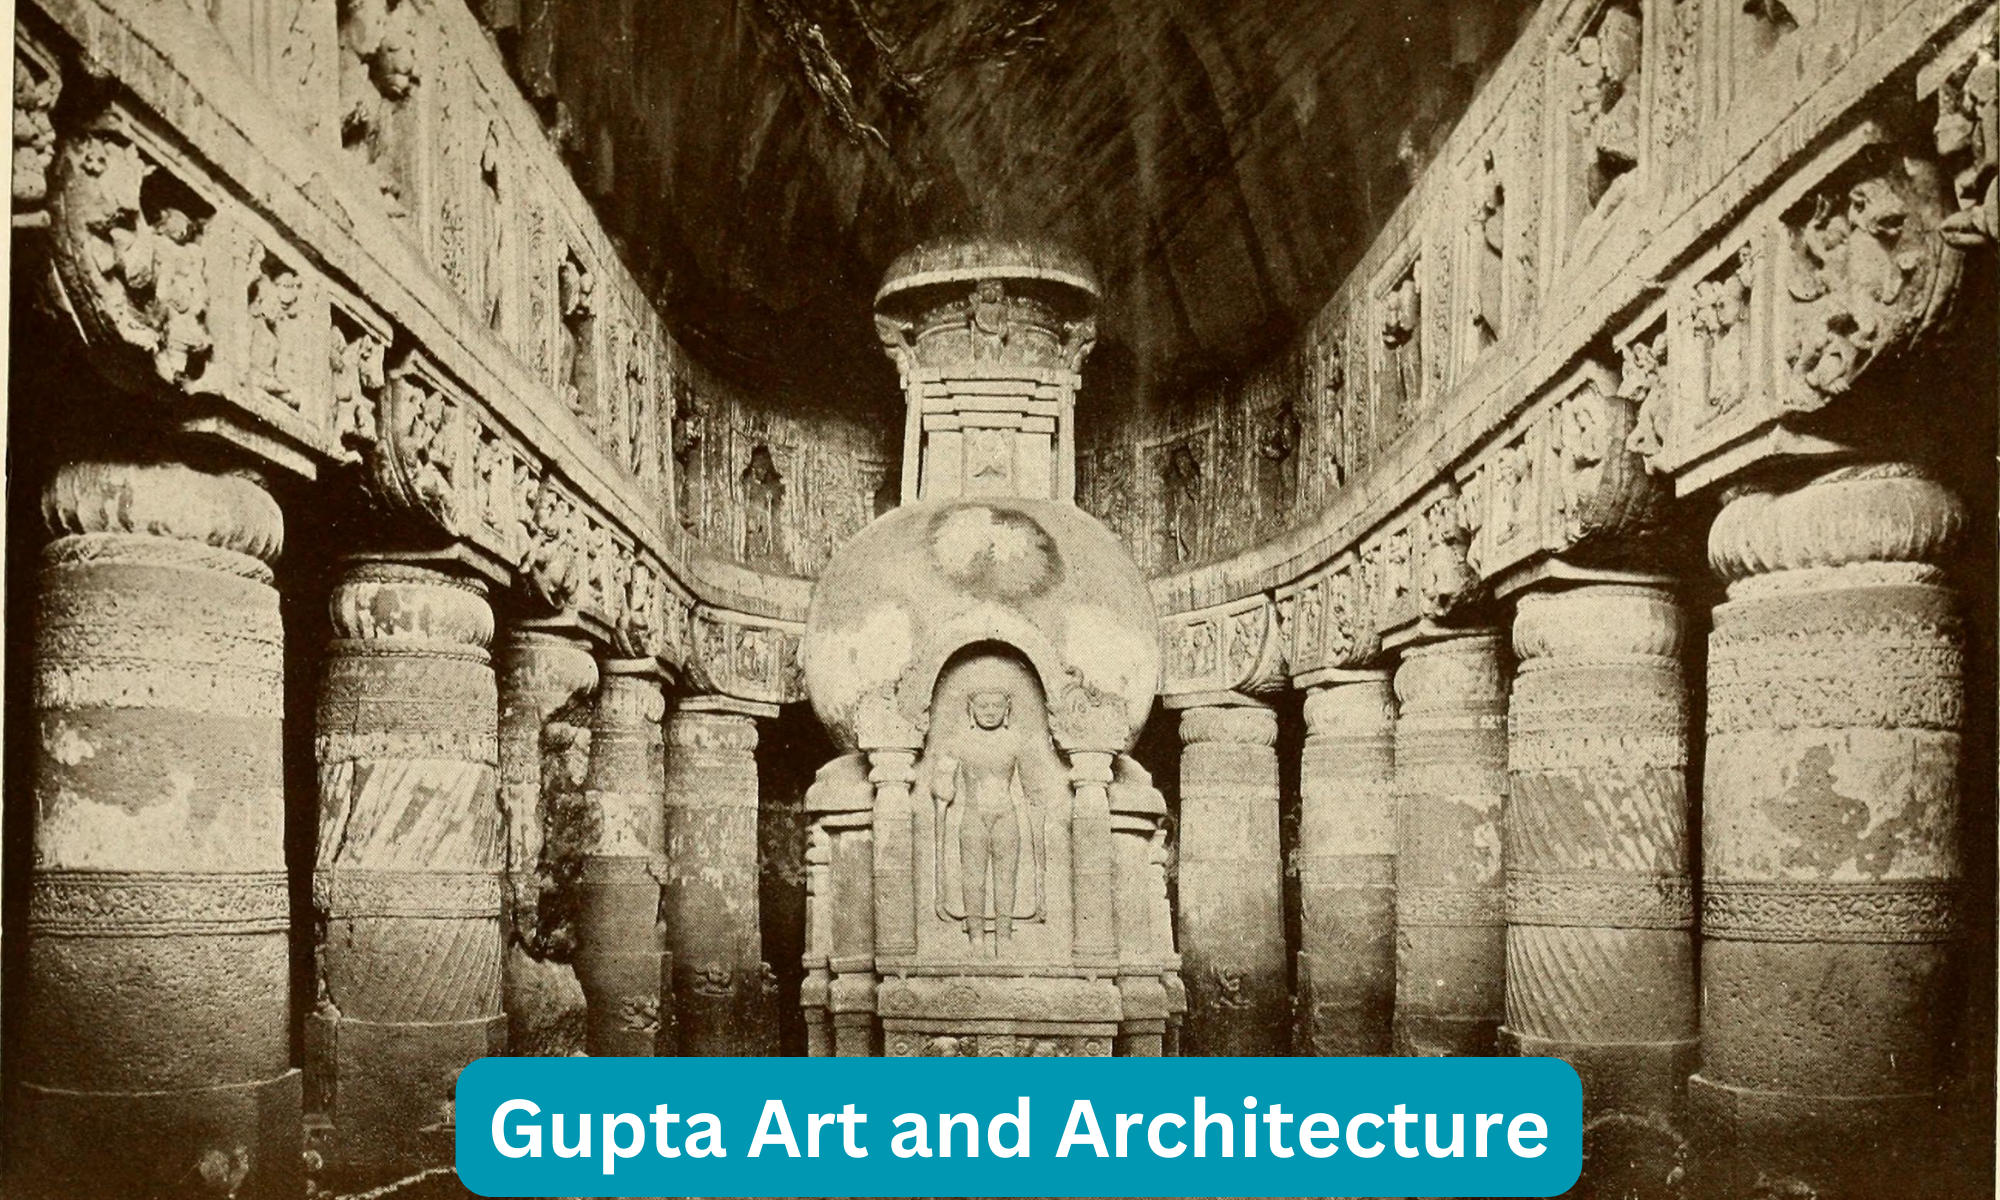 Gupta Empire Art and Architecture: Know About Gupta Art and Architecture_30.1